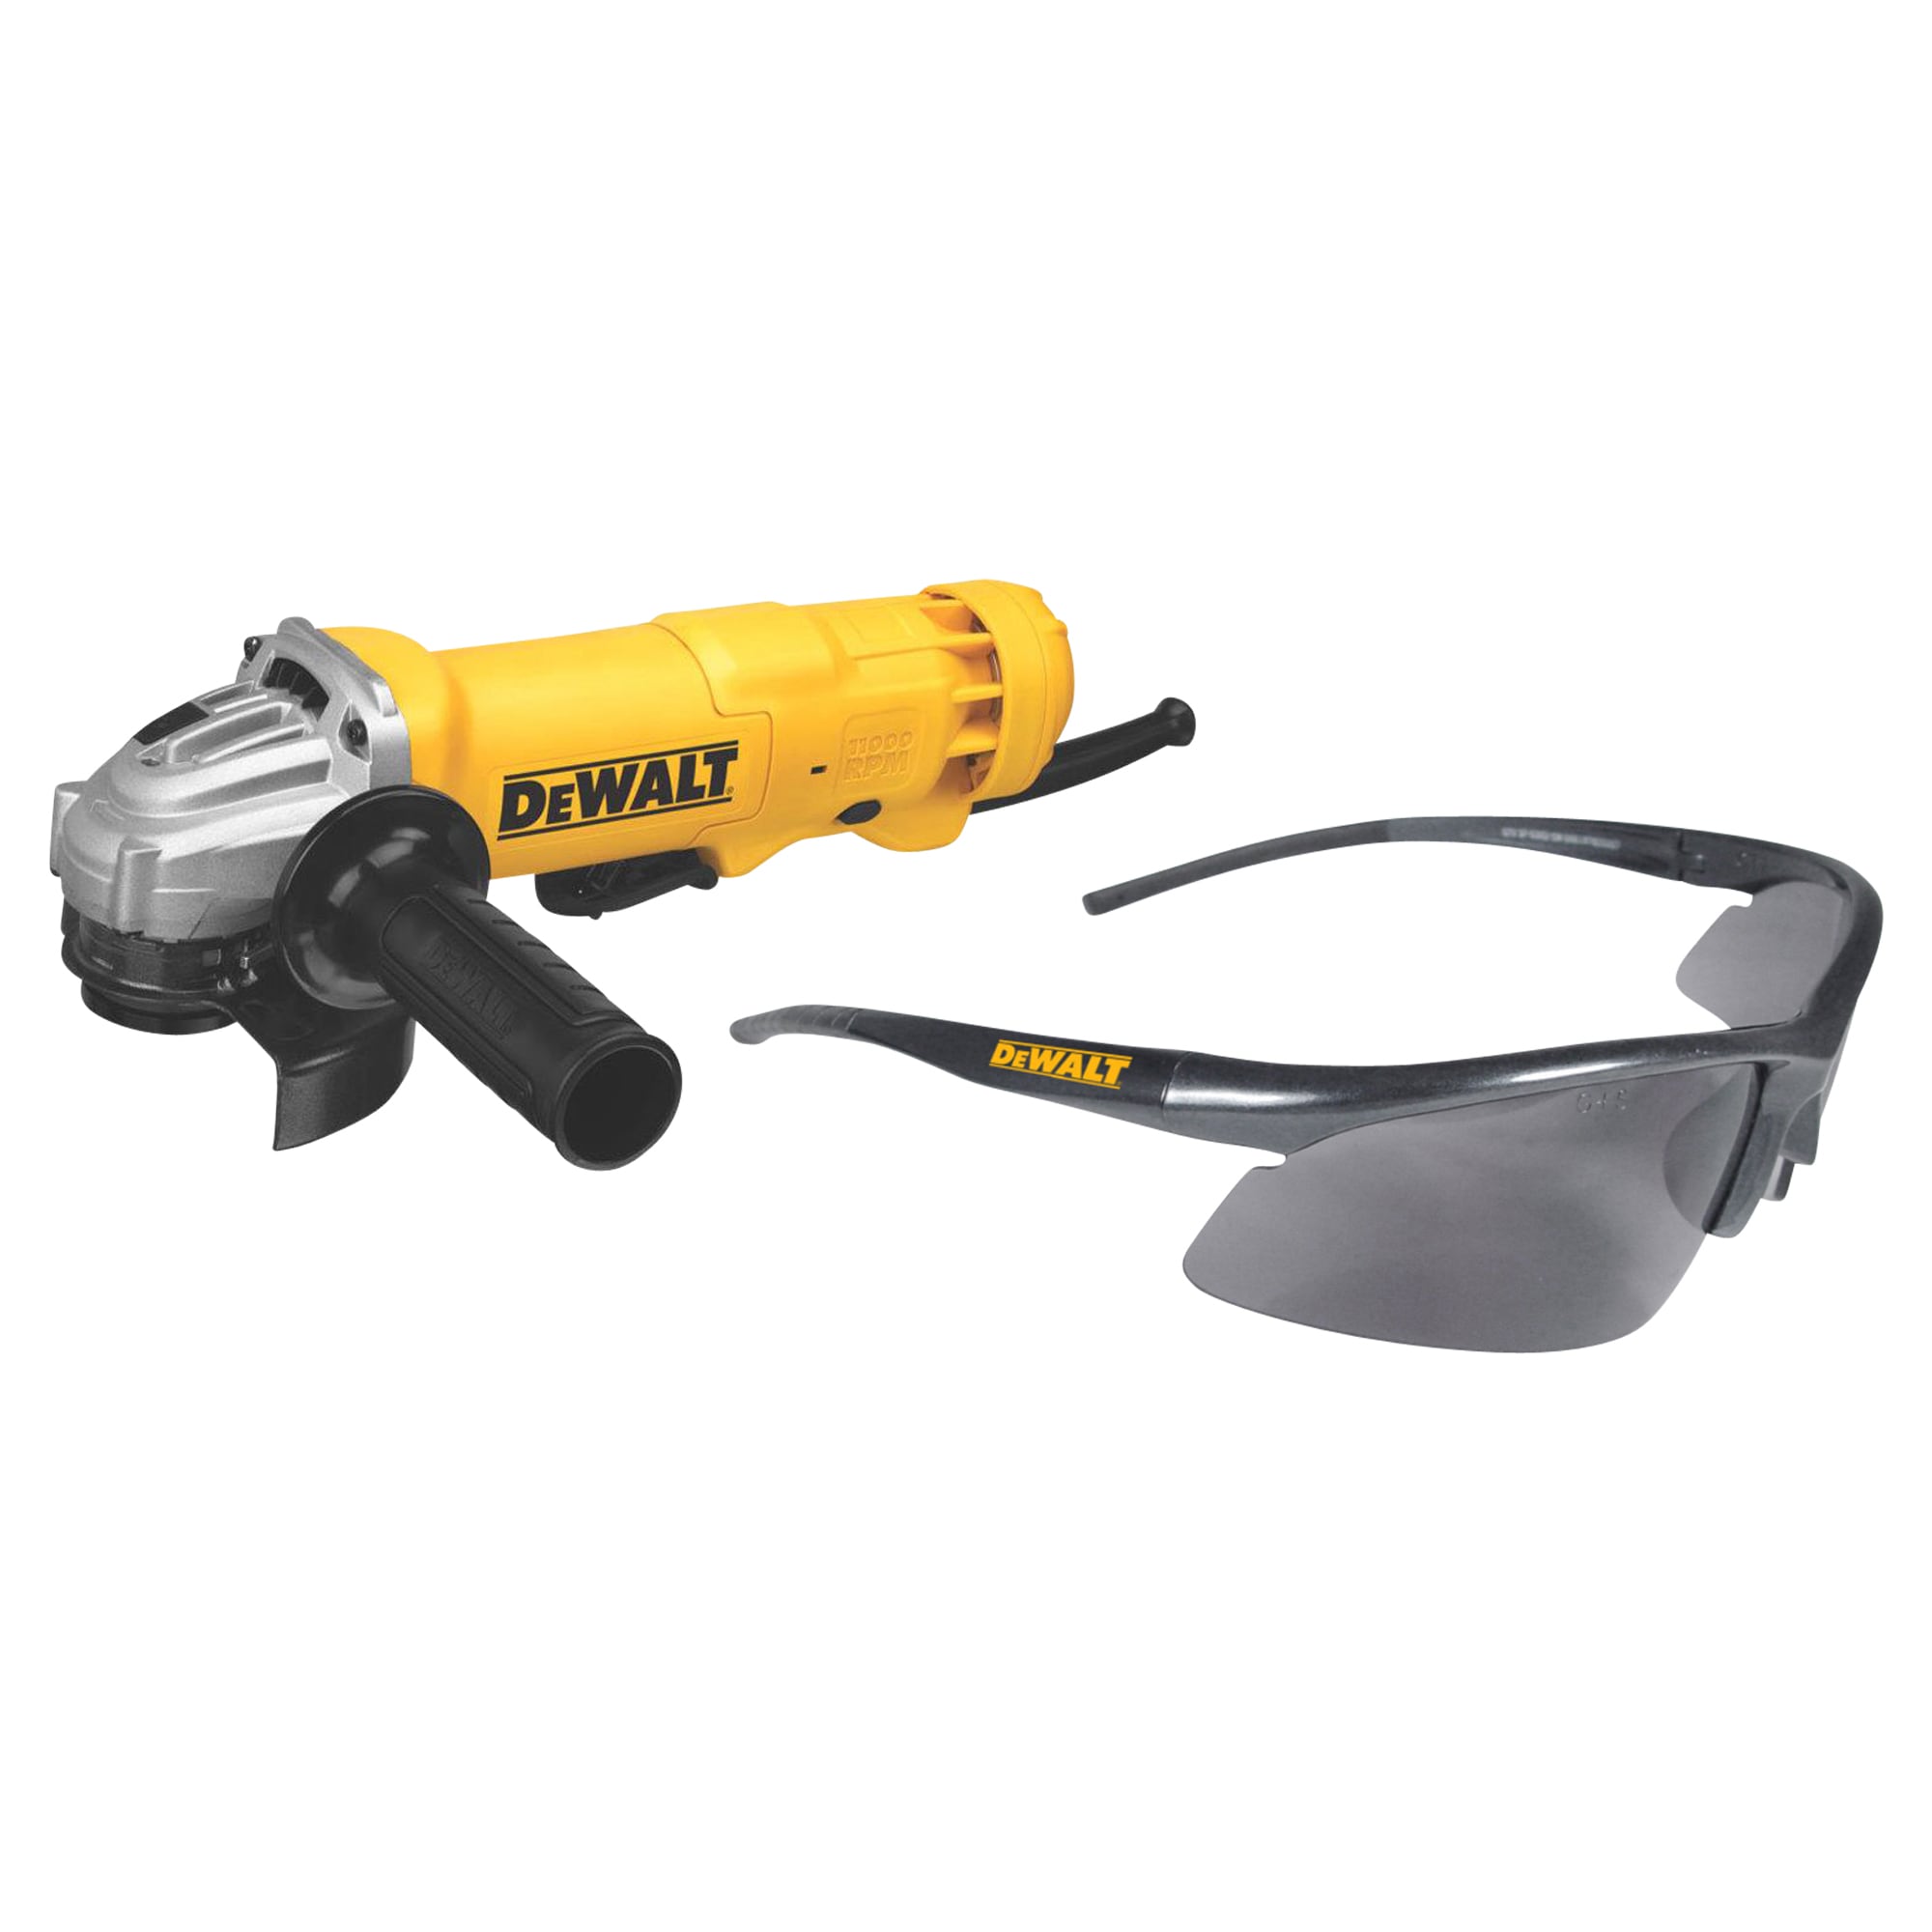 DEWALT 4.5-in 11 Amps Paddle Switch Corded Angle Grinder & Radius Plastic Safety Glasses